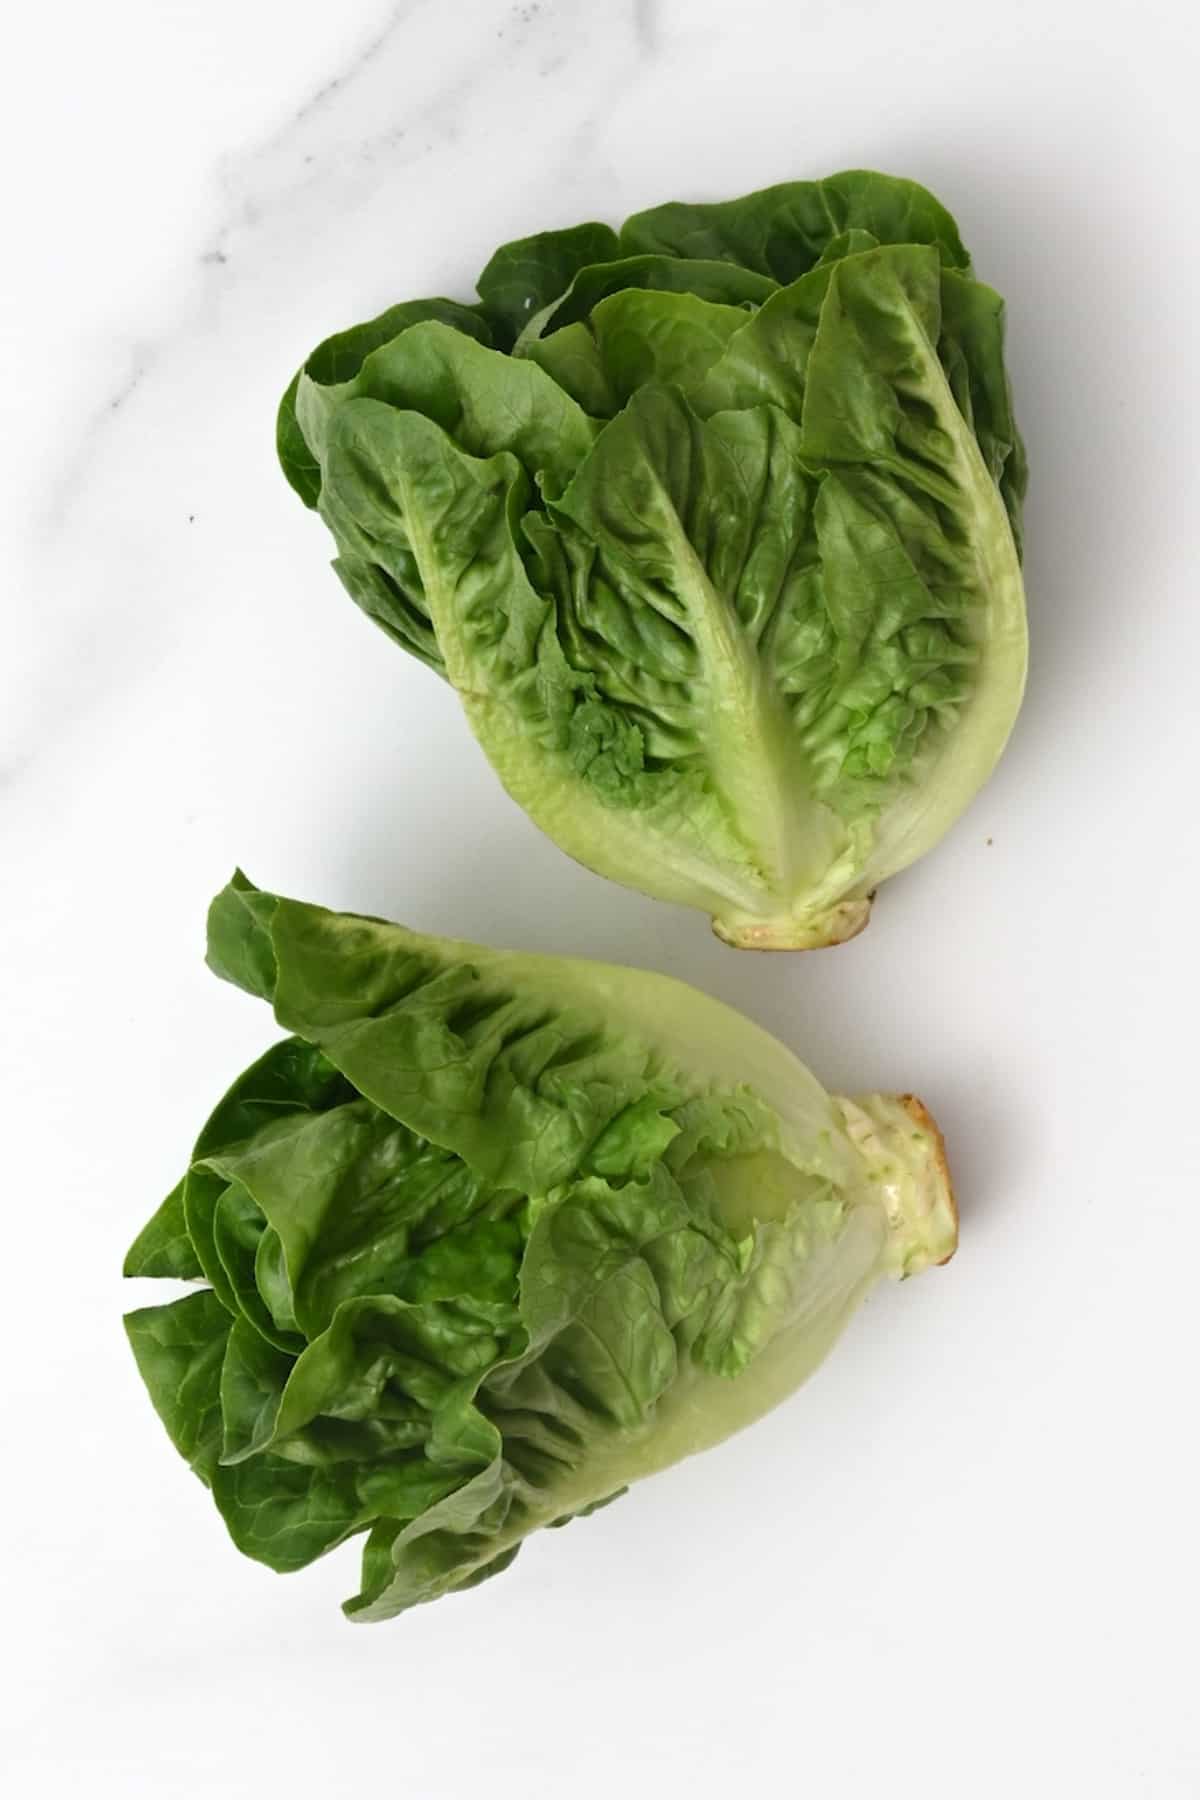 Two heads of butter lettuce